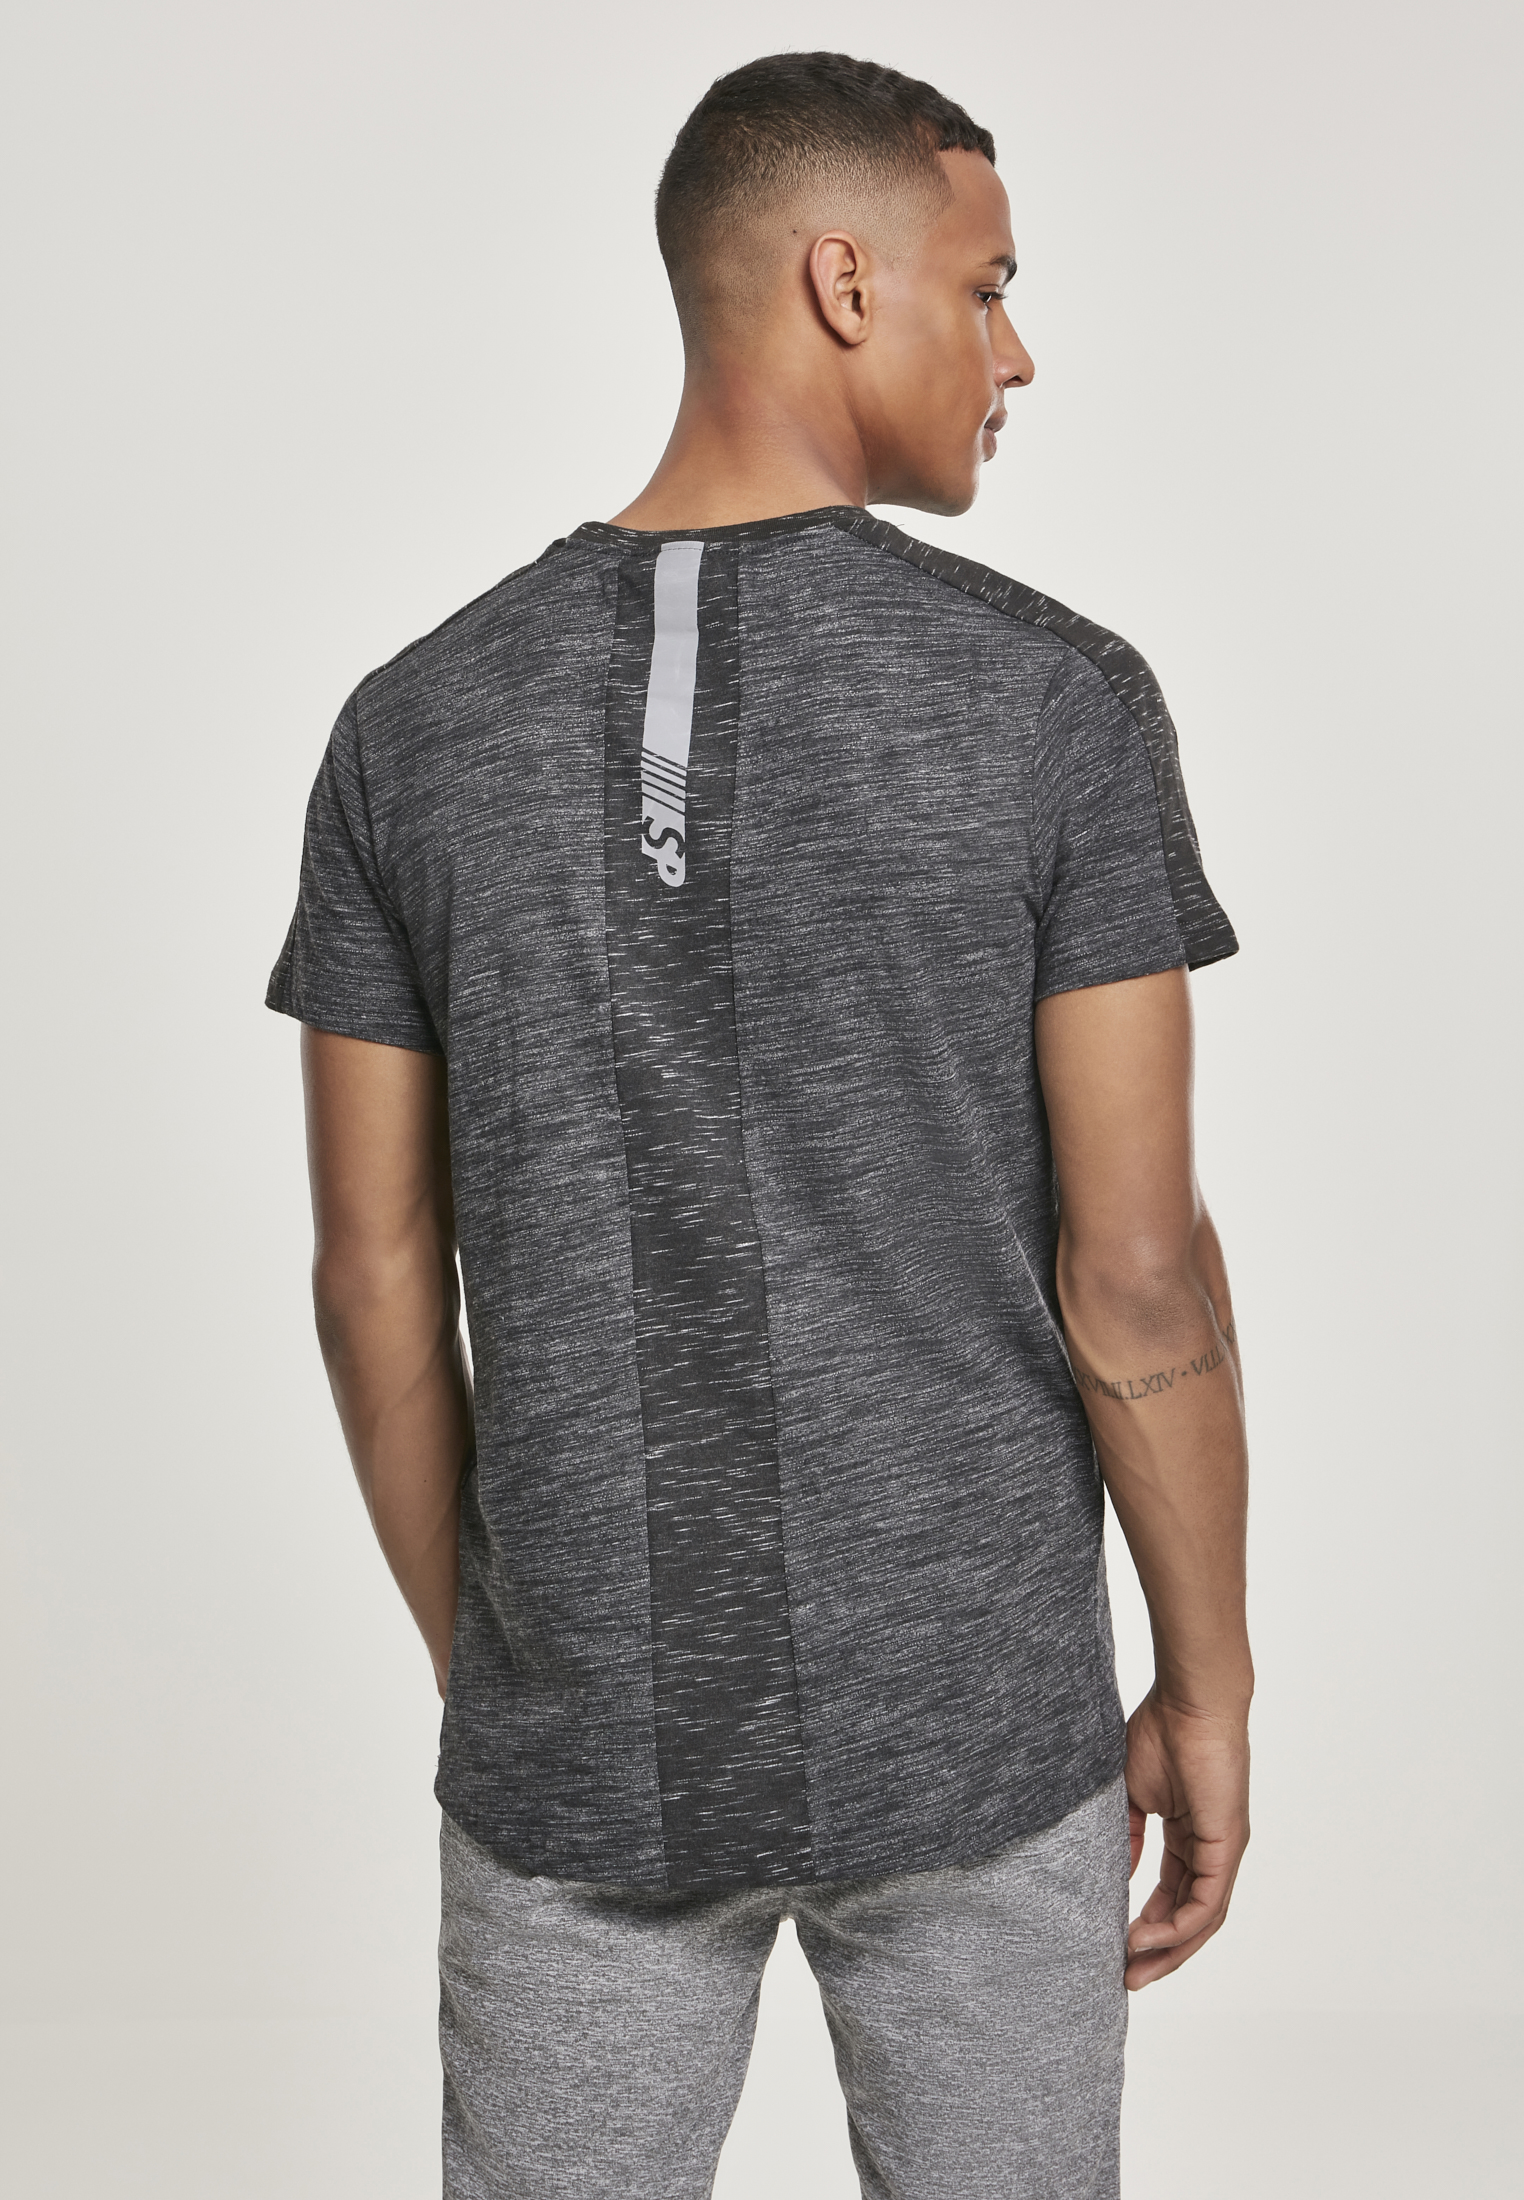 Southpole Shoulder Panel Tech Tee in Farbe marled charcoal